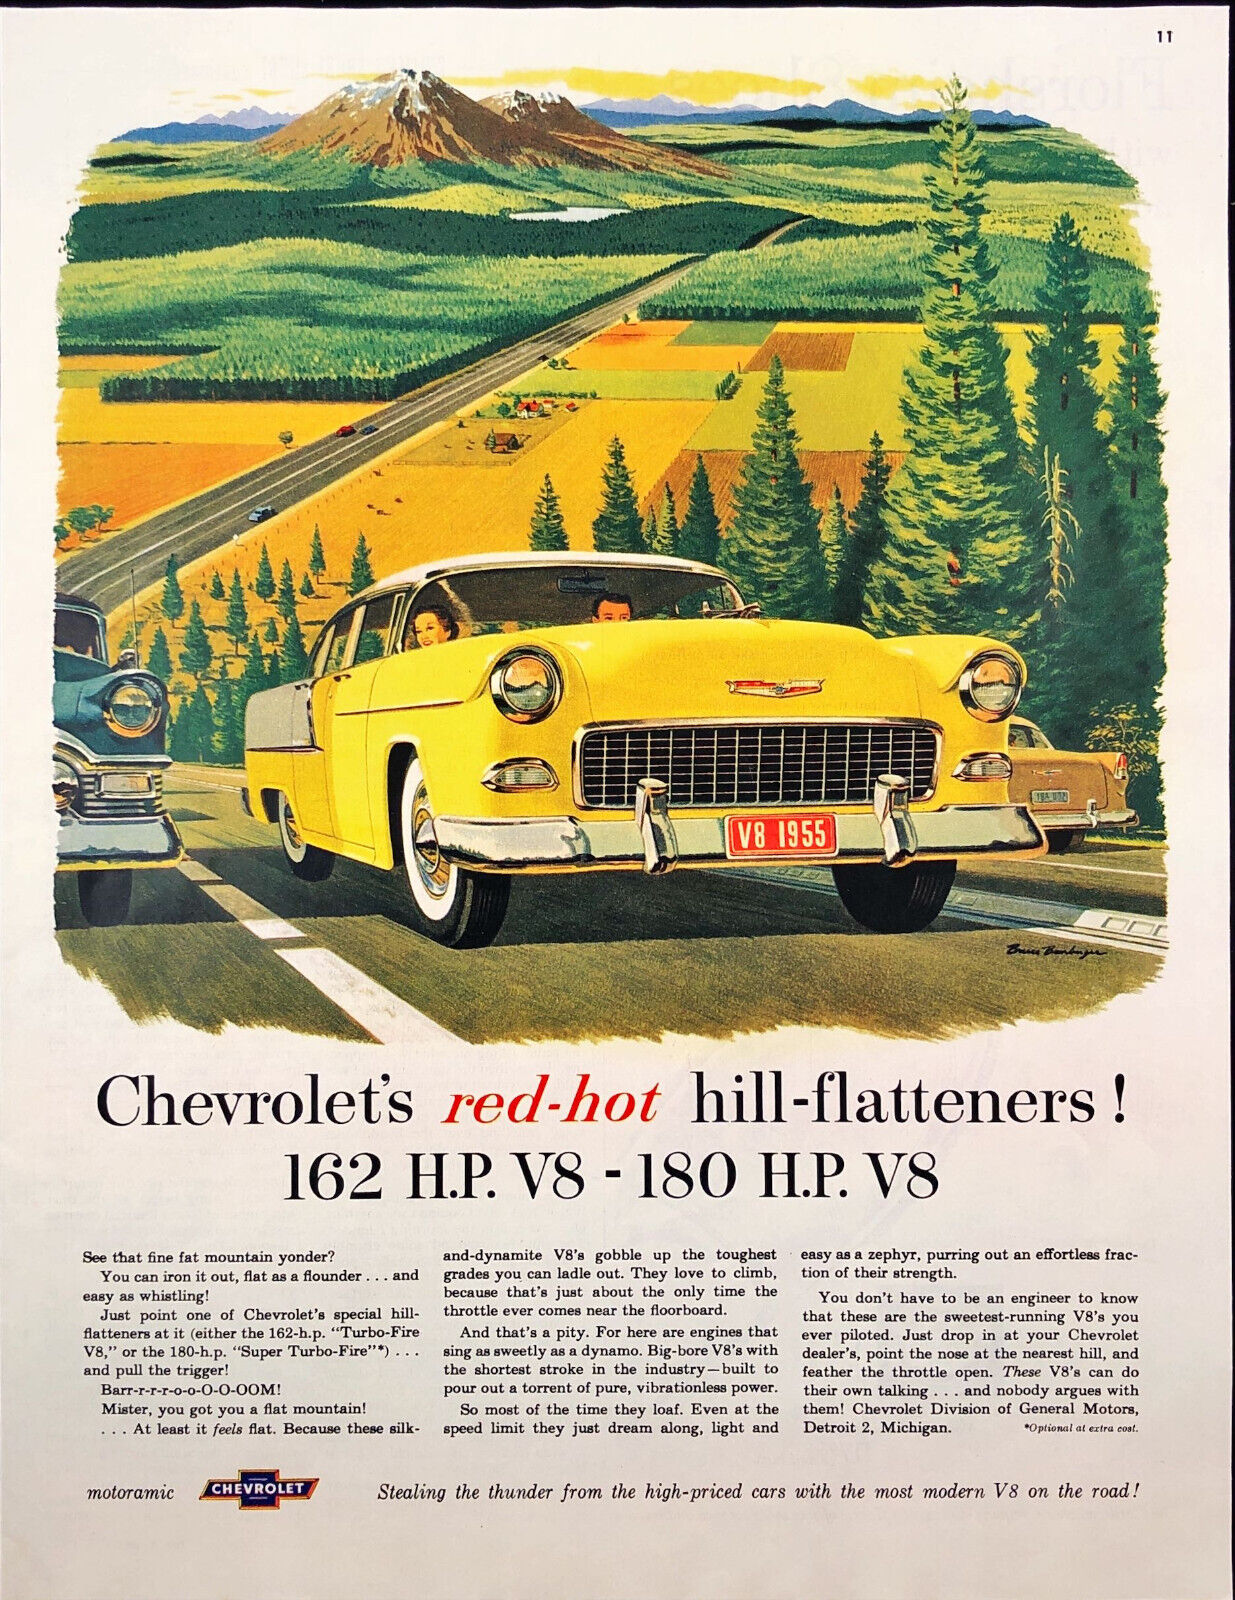 1955 Chevrolet V8 Hill Flatteners Engines Vintage Print Ad Yellow Car Mountains